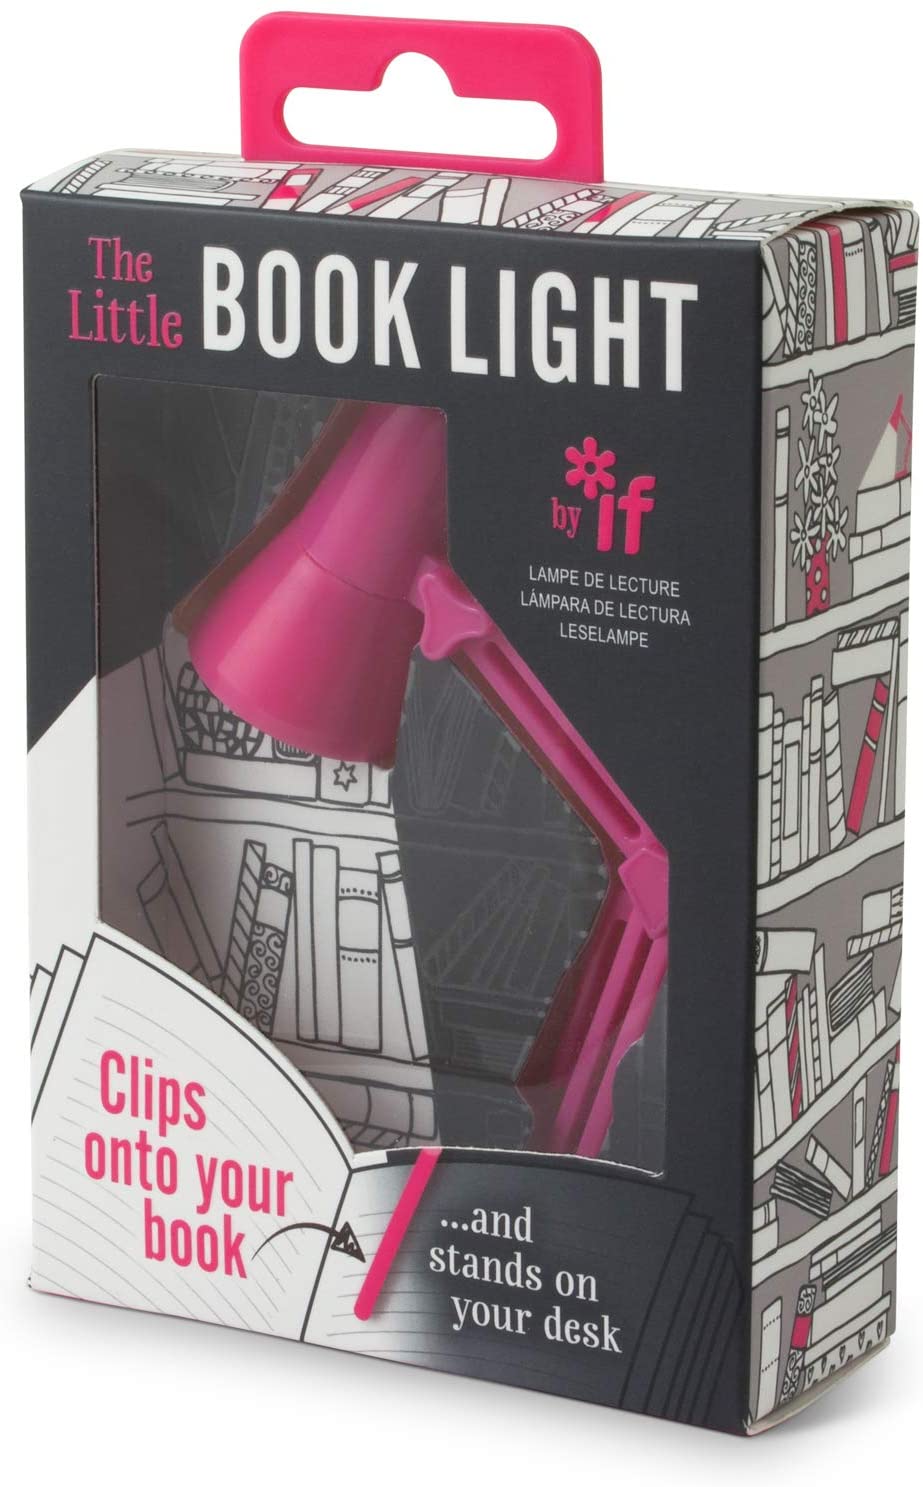 Lampa pentru citit - The little book light - Pink | If (That Company Called) image1